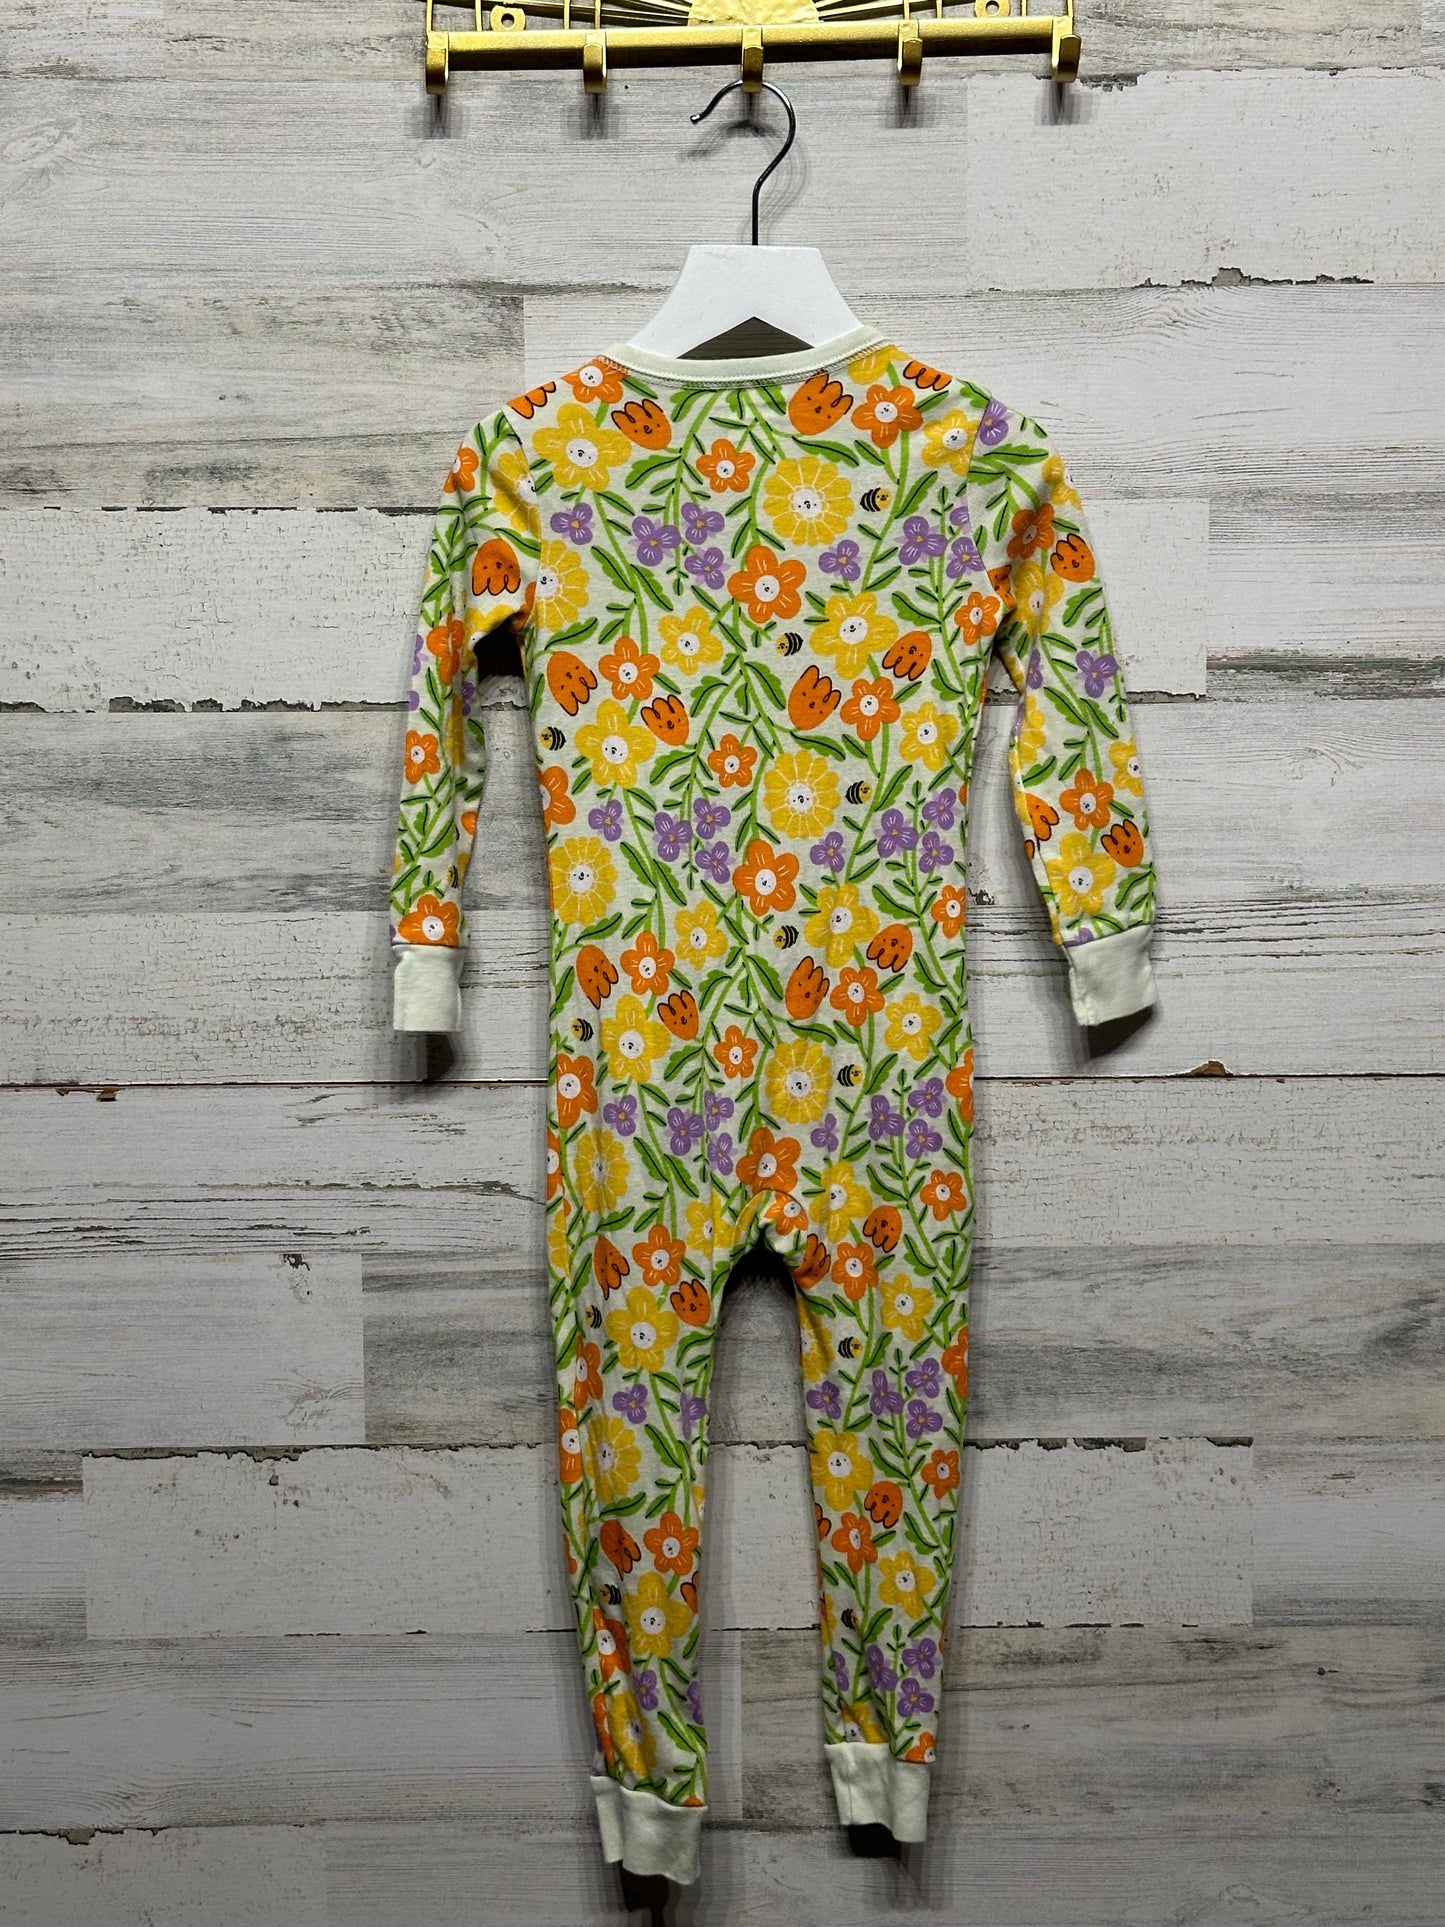 Girls Size 3t Old Navy Floral Zip Coverall - Good Used Condition